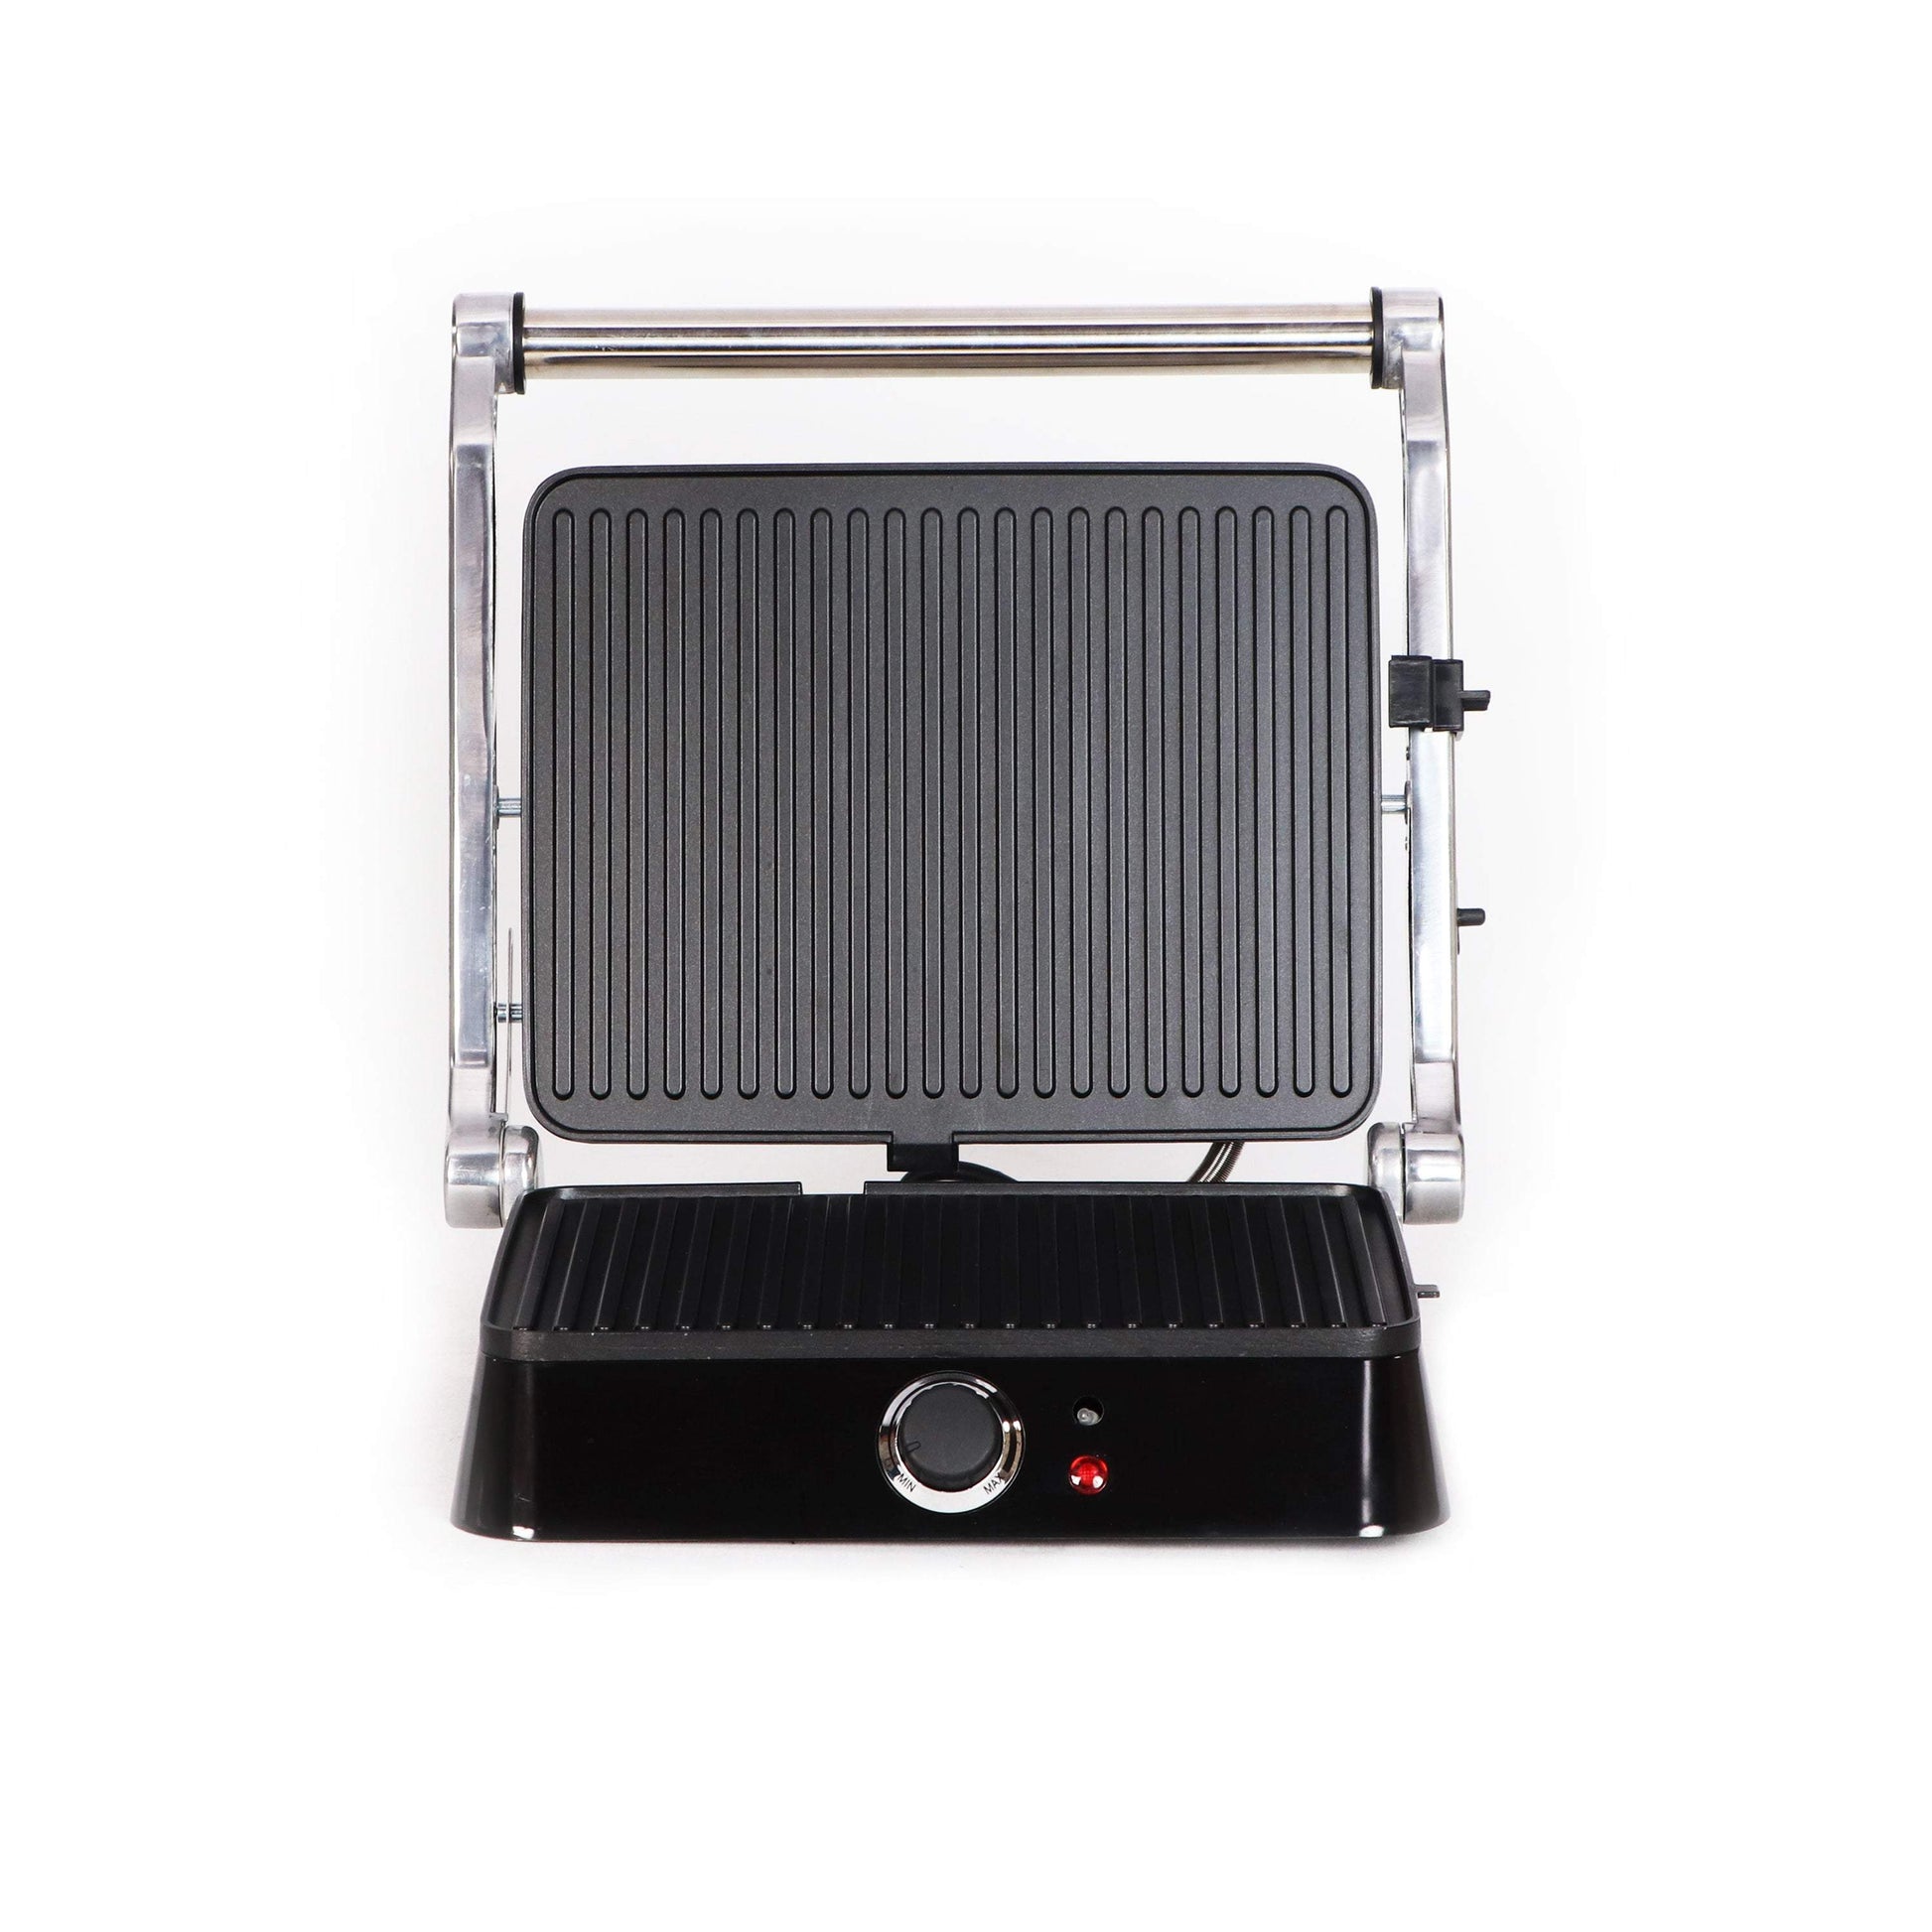 DSP Healthy Grill 1400W-Royal Brands Co-